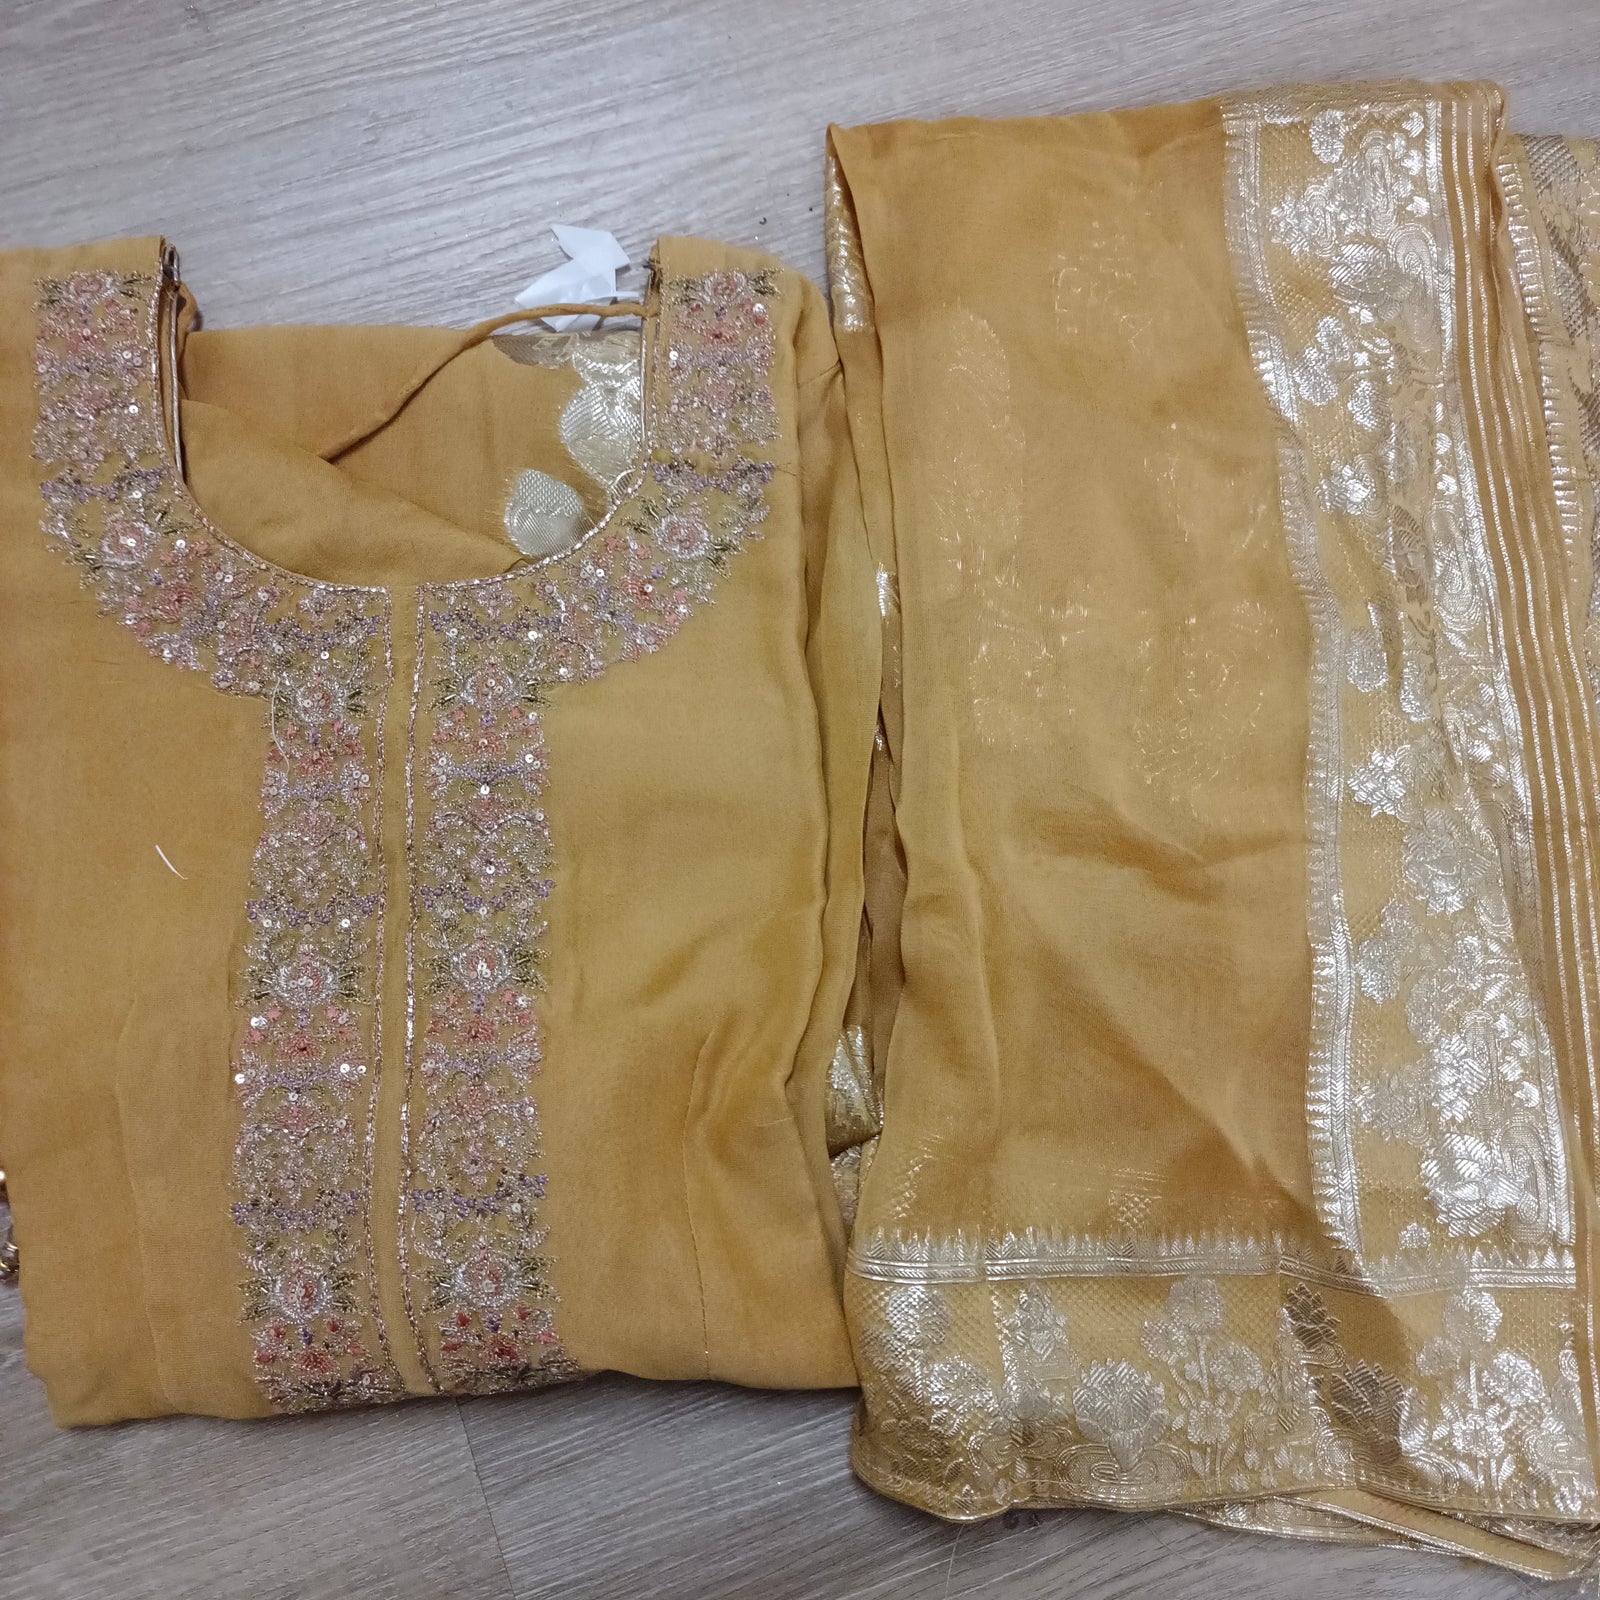 Embroidered Pants suit with banarsi dupatta